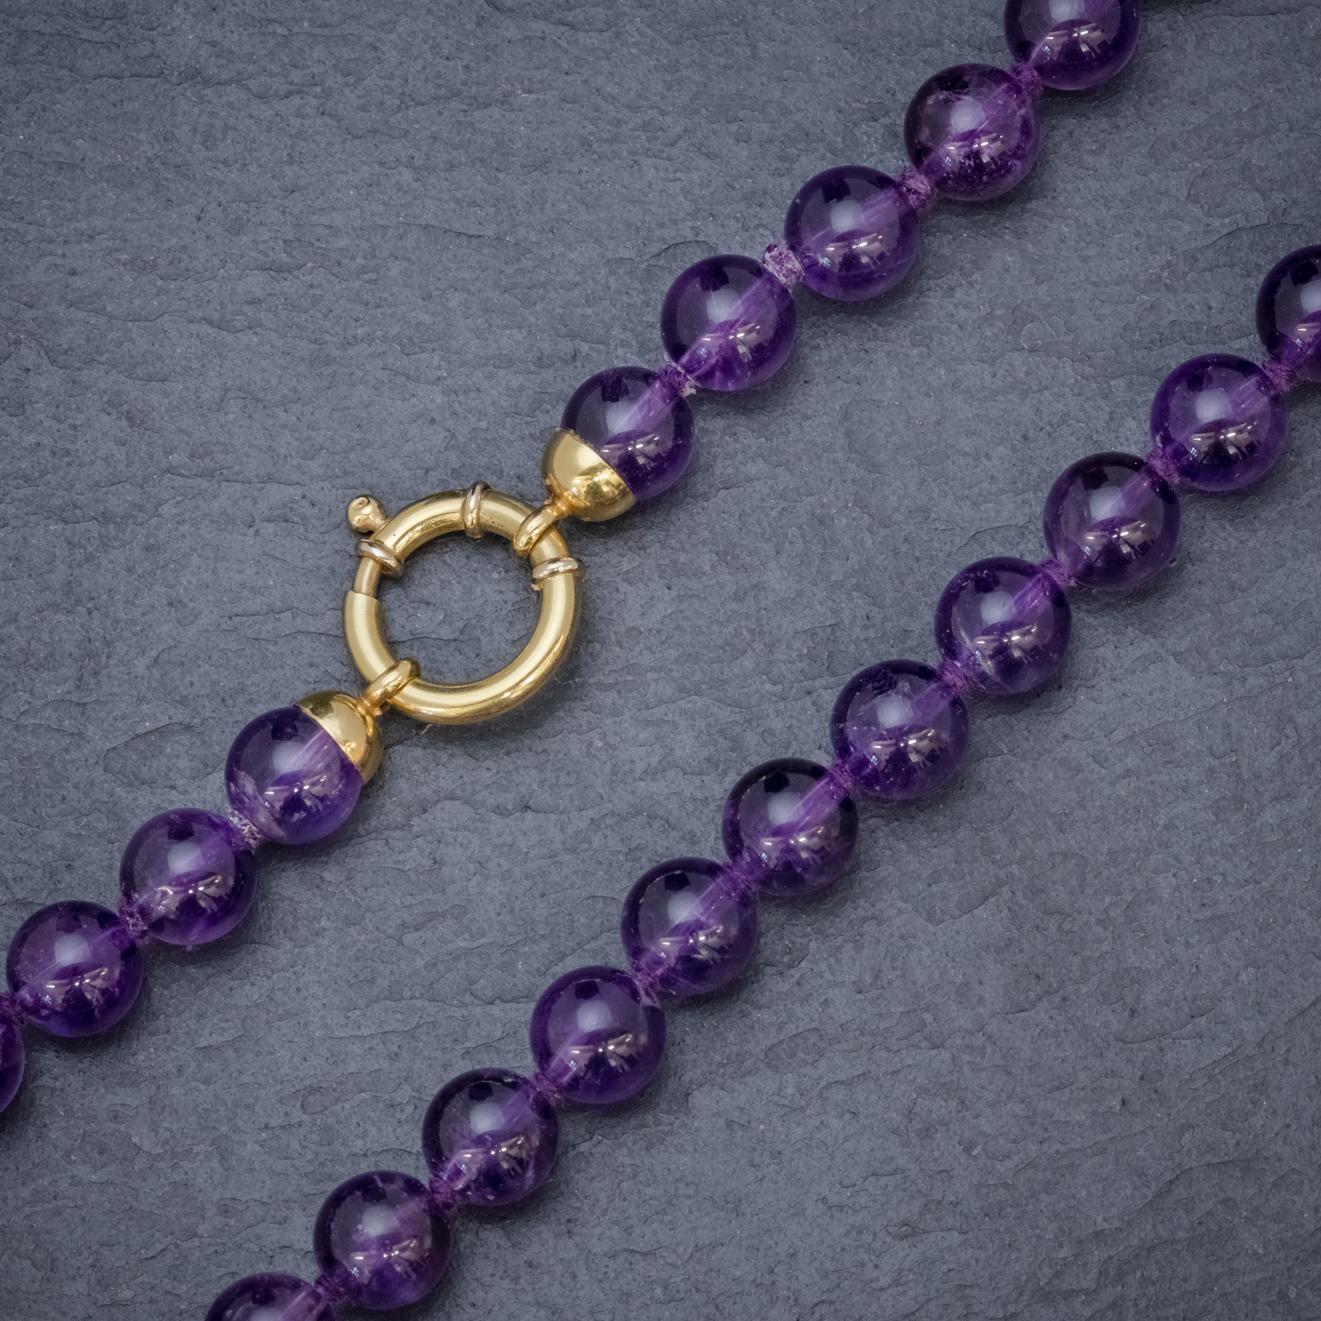 Antique Victorian Amethyst Necklace 18 Carat Gold Clasp, circa 1900 For Sale 2